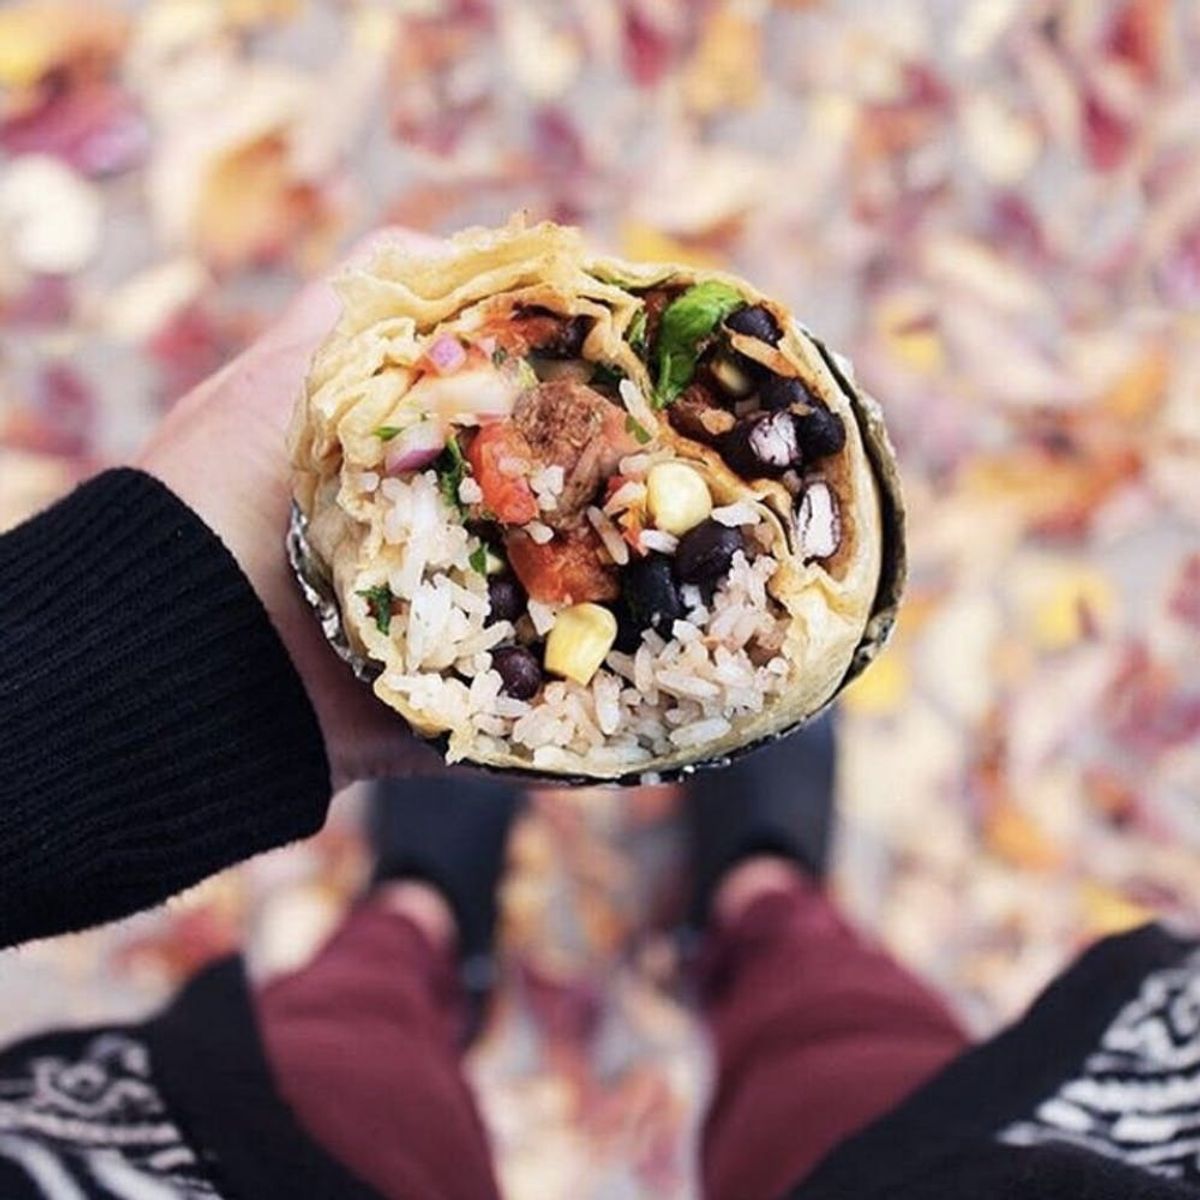 Chipotle Wants You to Love Them Again With EVEN MORE Free Burritos